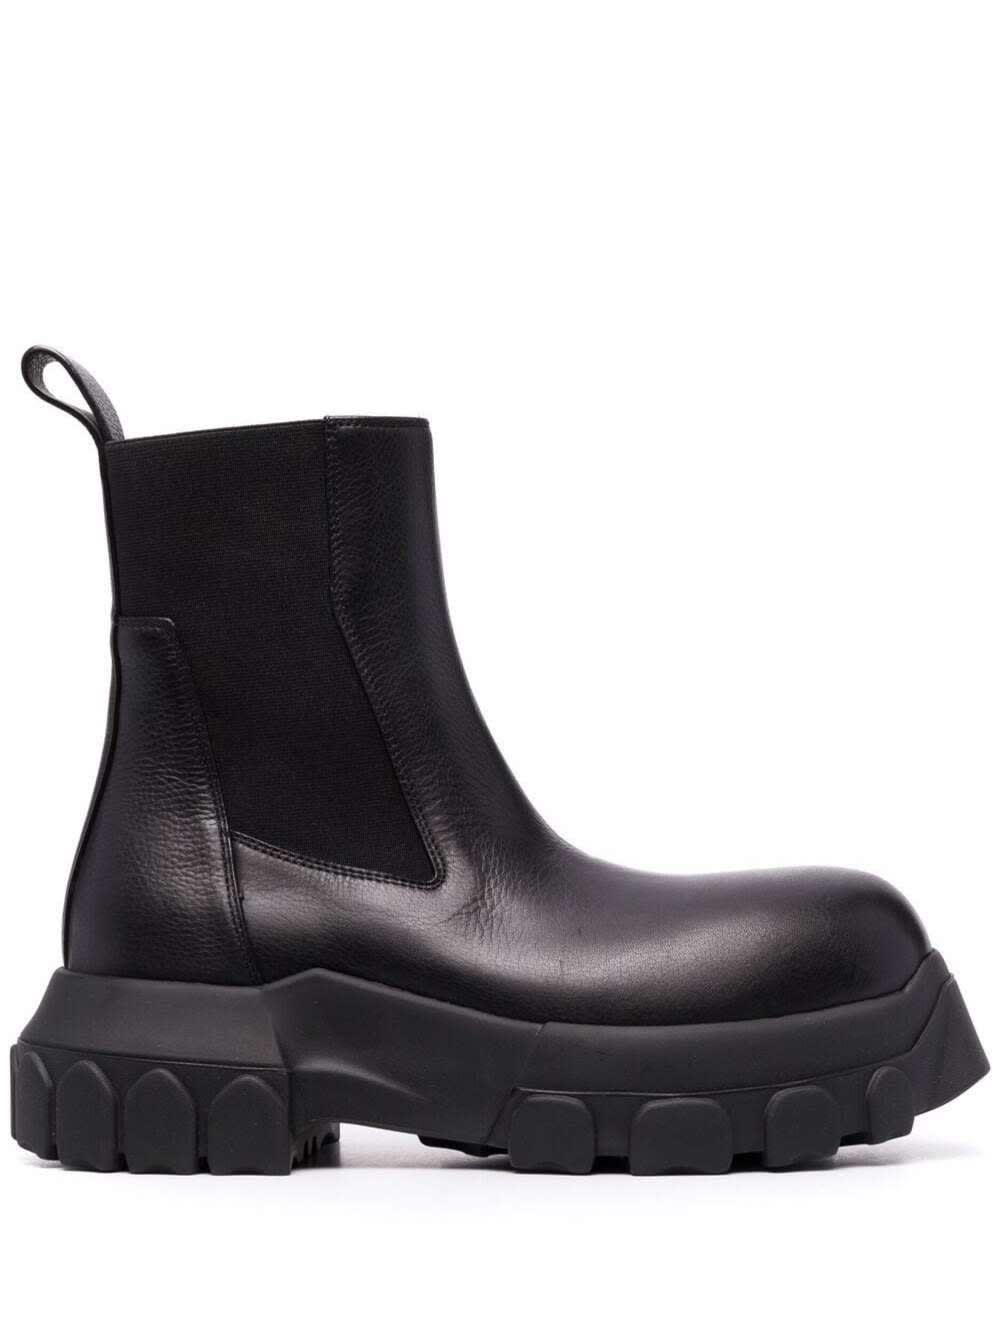 Buy Rick Owens Chunky Black Leather Boots online, shop Rick Owens shoes with free shipping